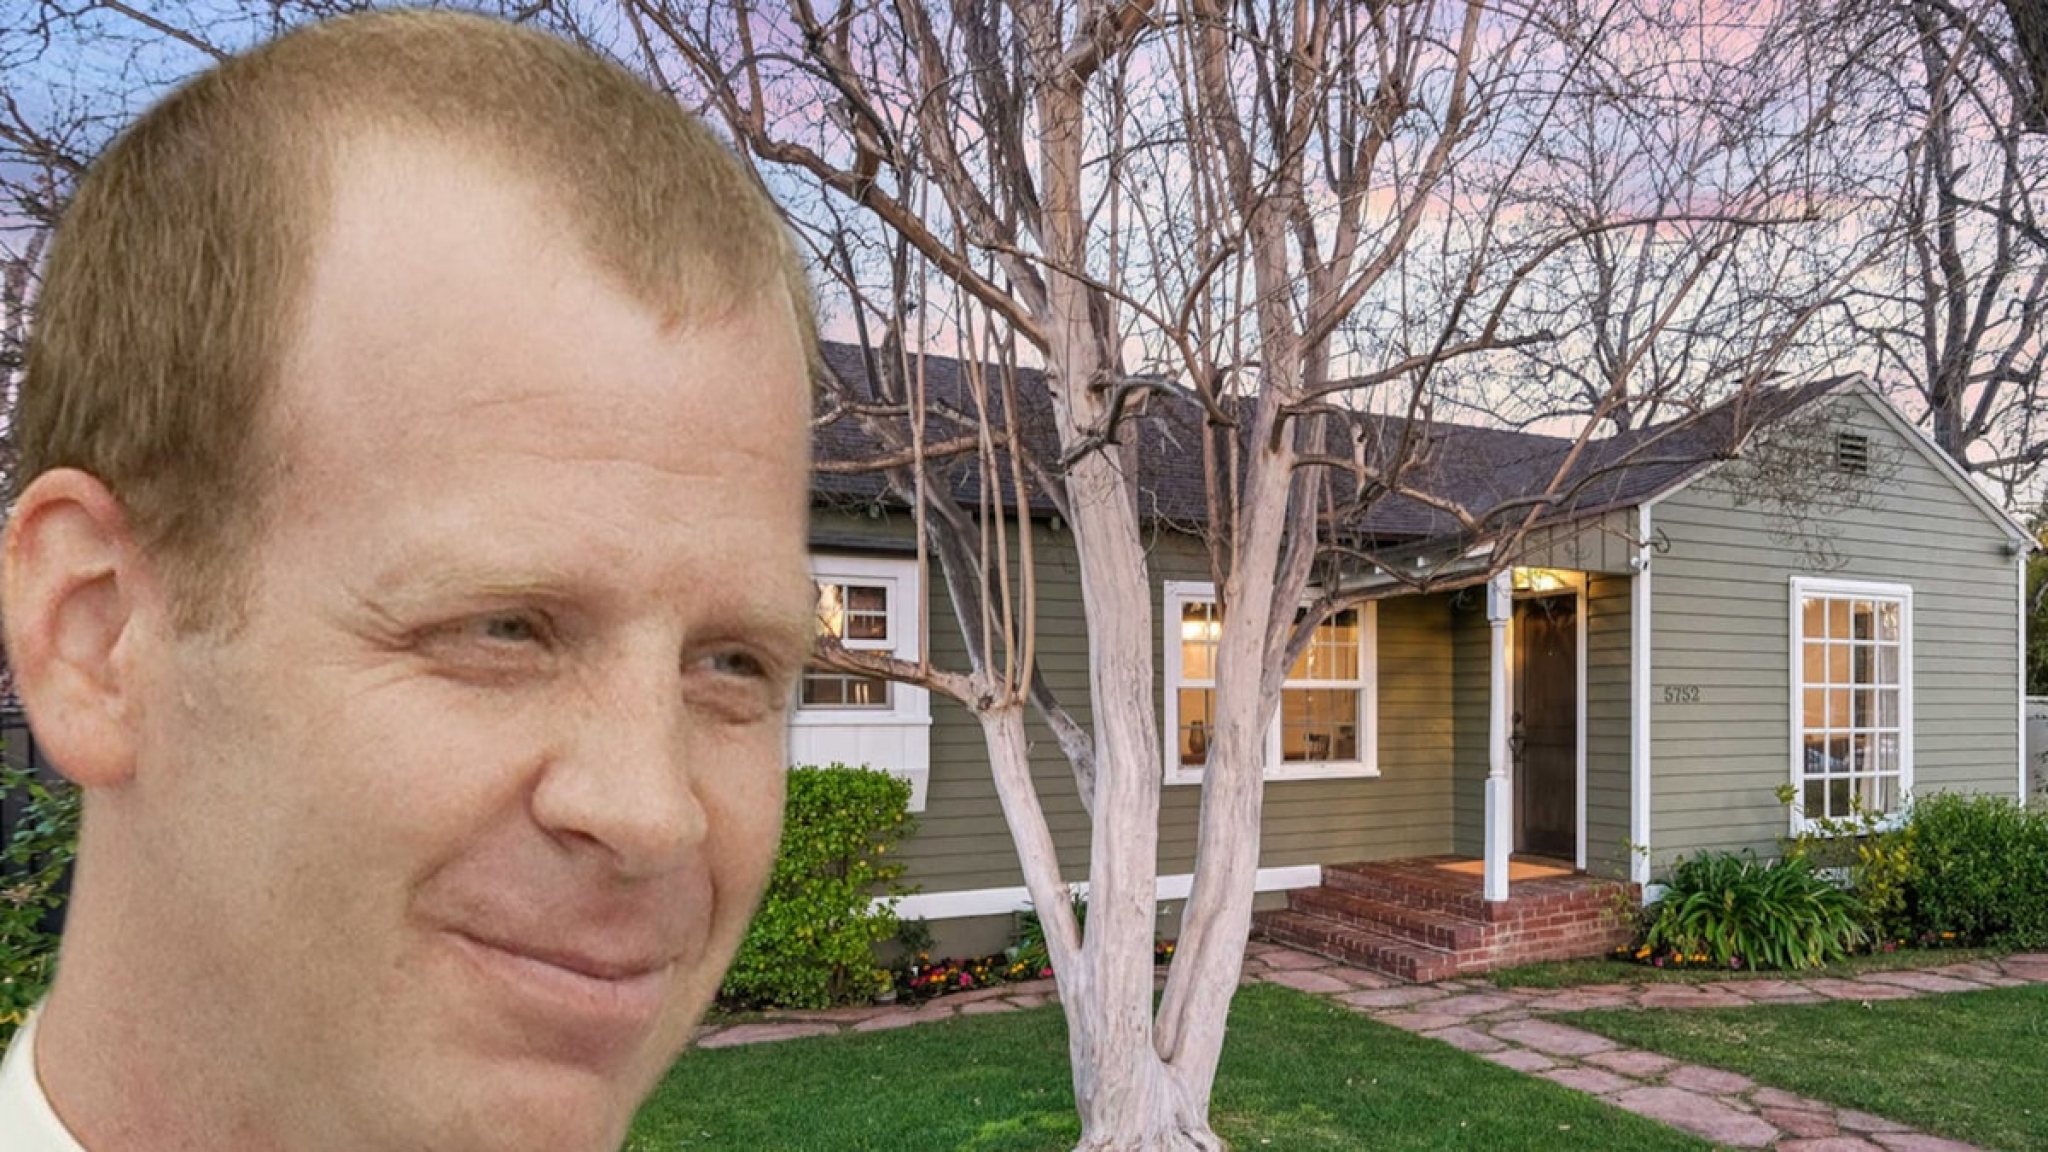 Toby’s House from ‘The Office’ For Sale at Over a Million Dollars